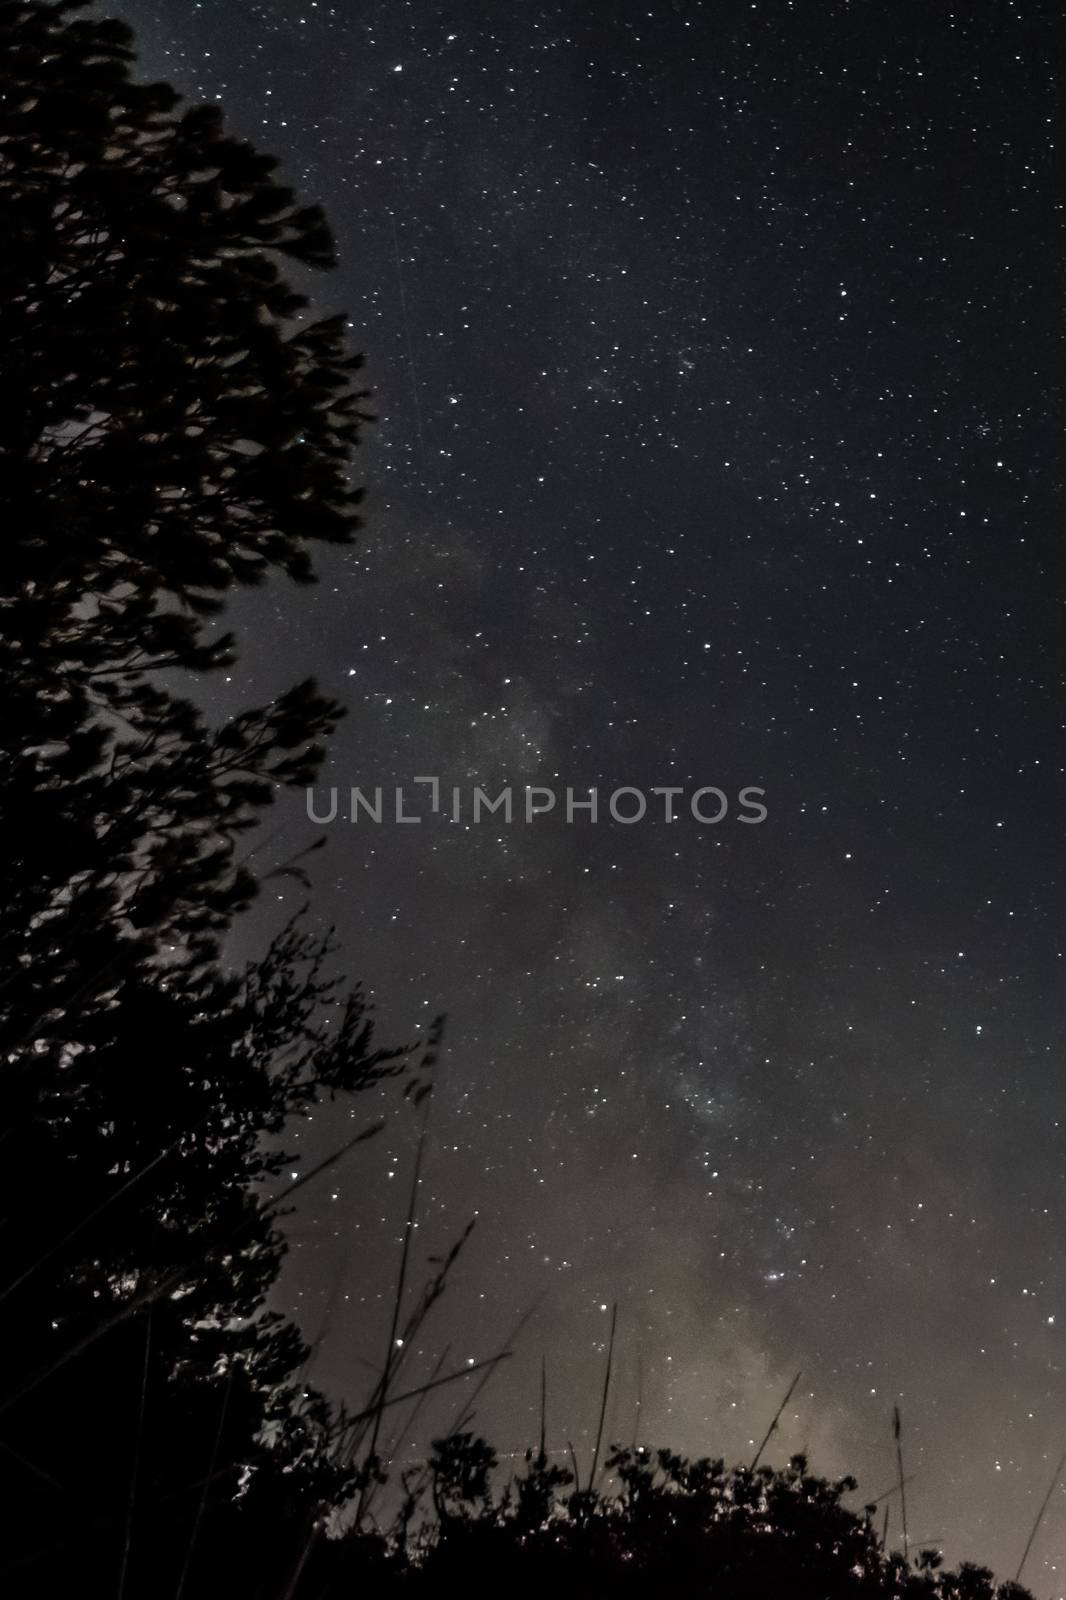 Colorful milky way with many stars with trees in foreground by MXW_Stock